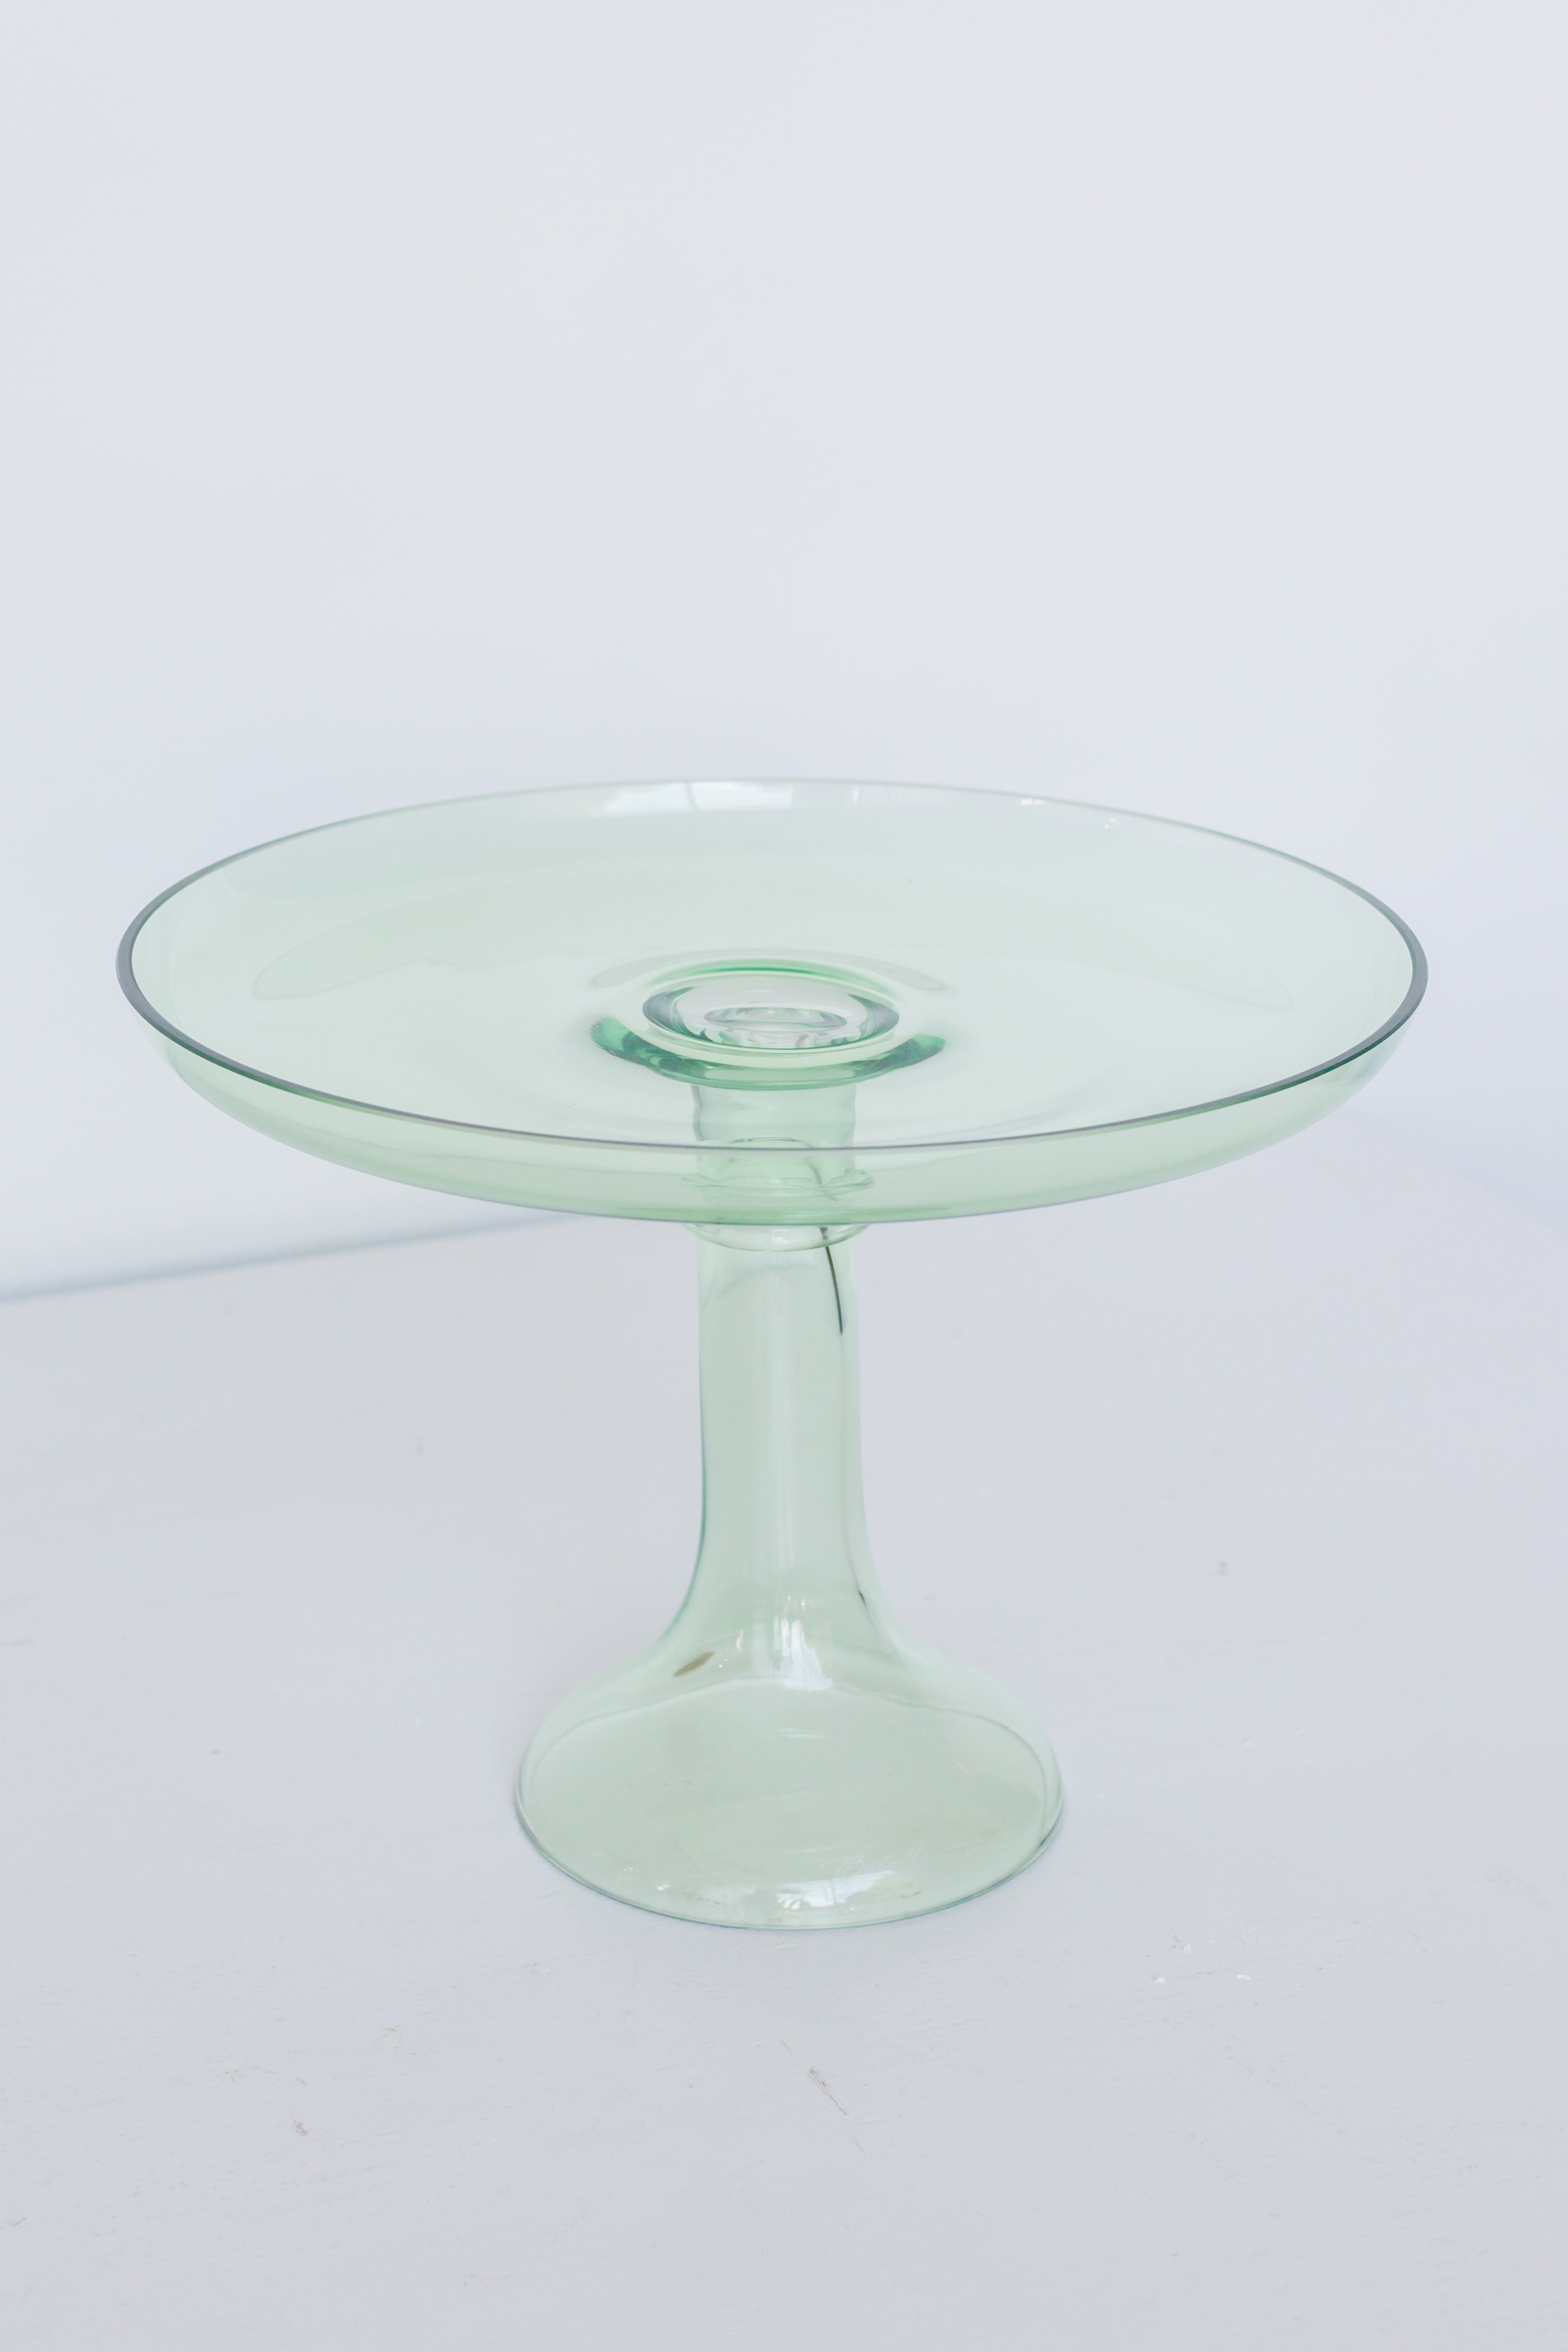 Vintage Glass Cake Stands & Footed Bowls | Vintage Prop Hire by The Prop  Library